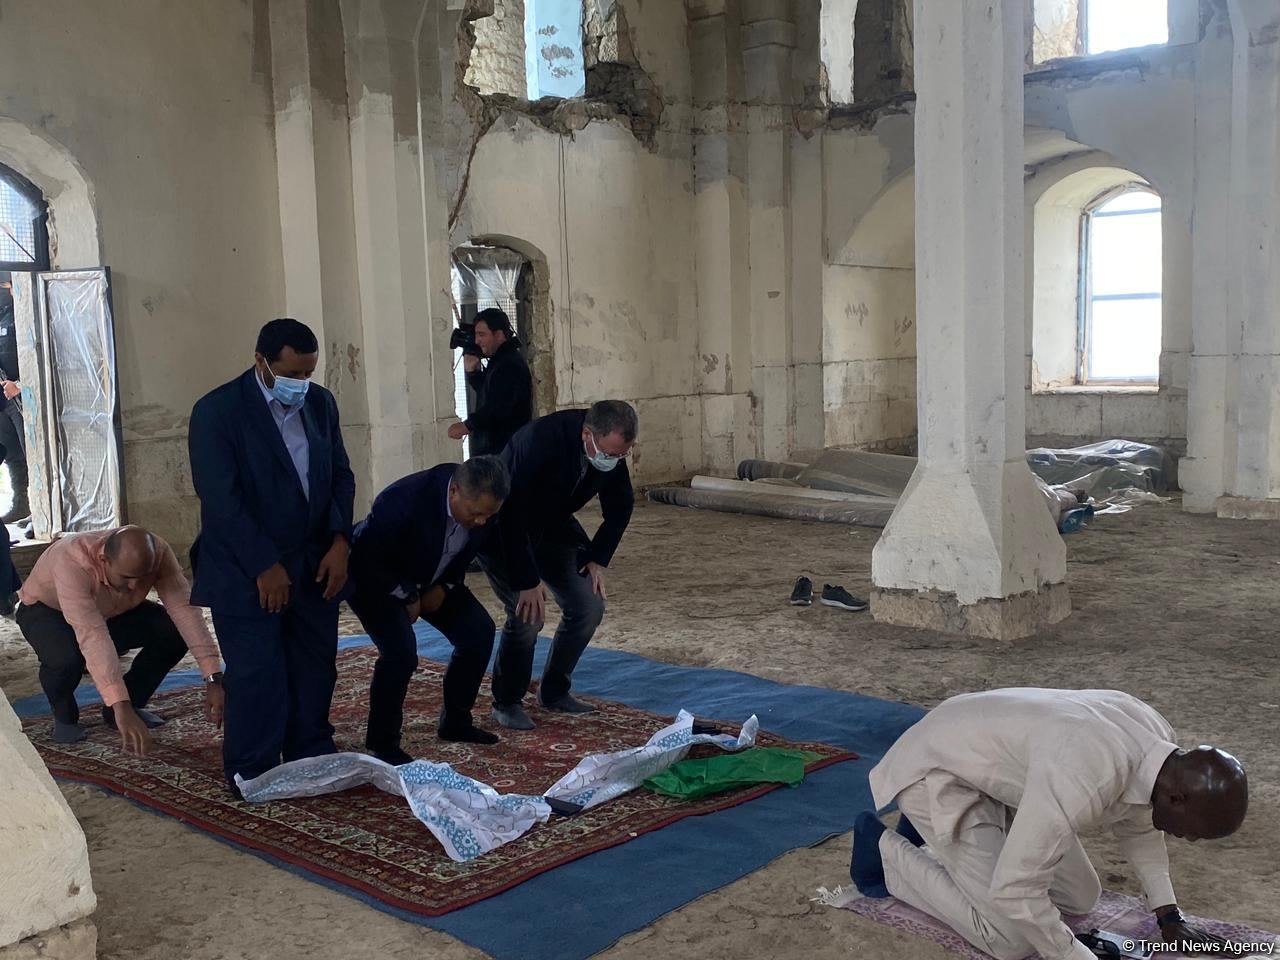 OIC reps pray in Juma Mosque during visit to Azerbaijan’s Aghdam district (PHOTO/VIDEO)